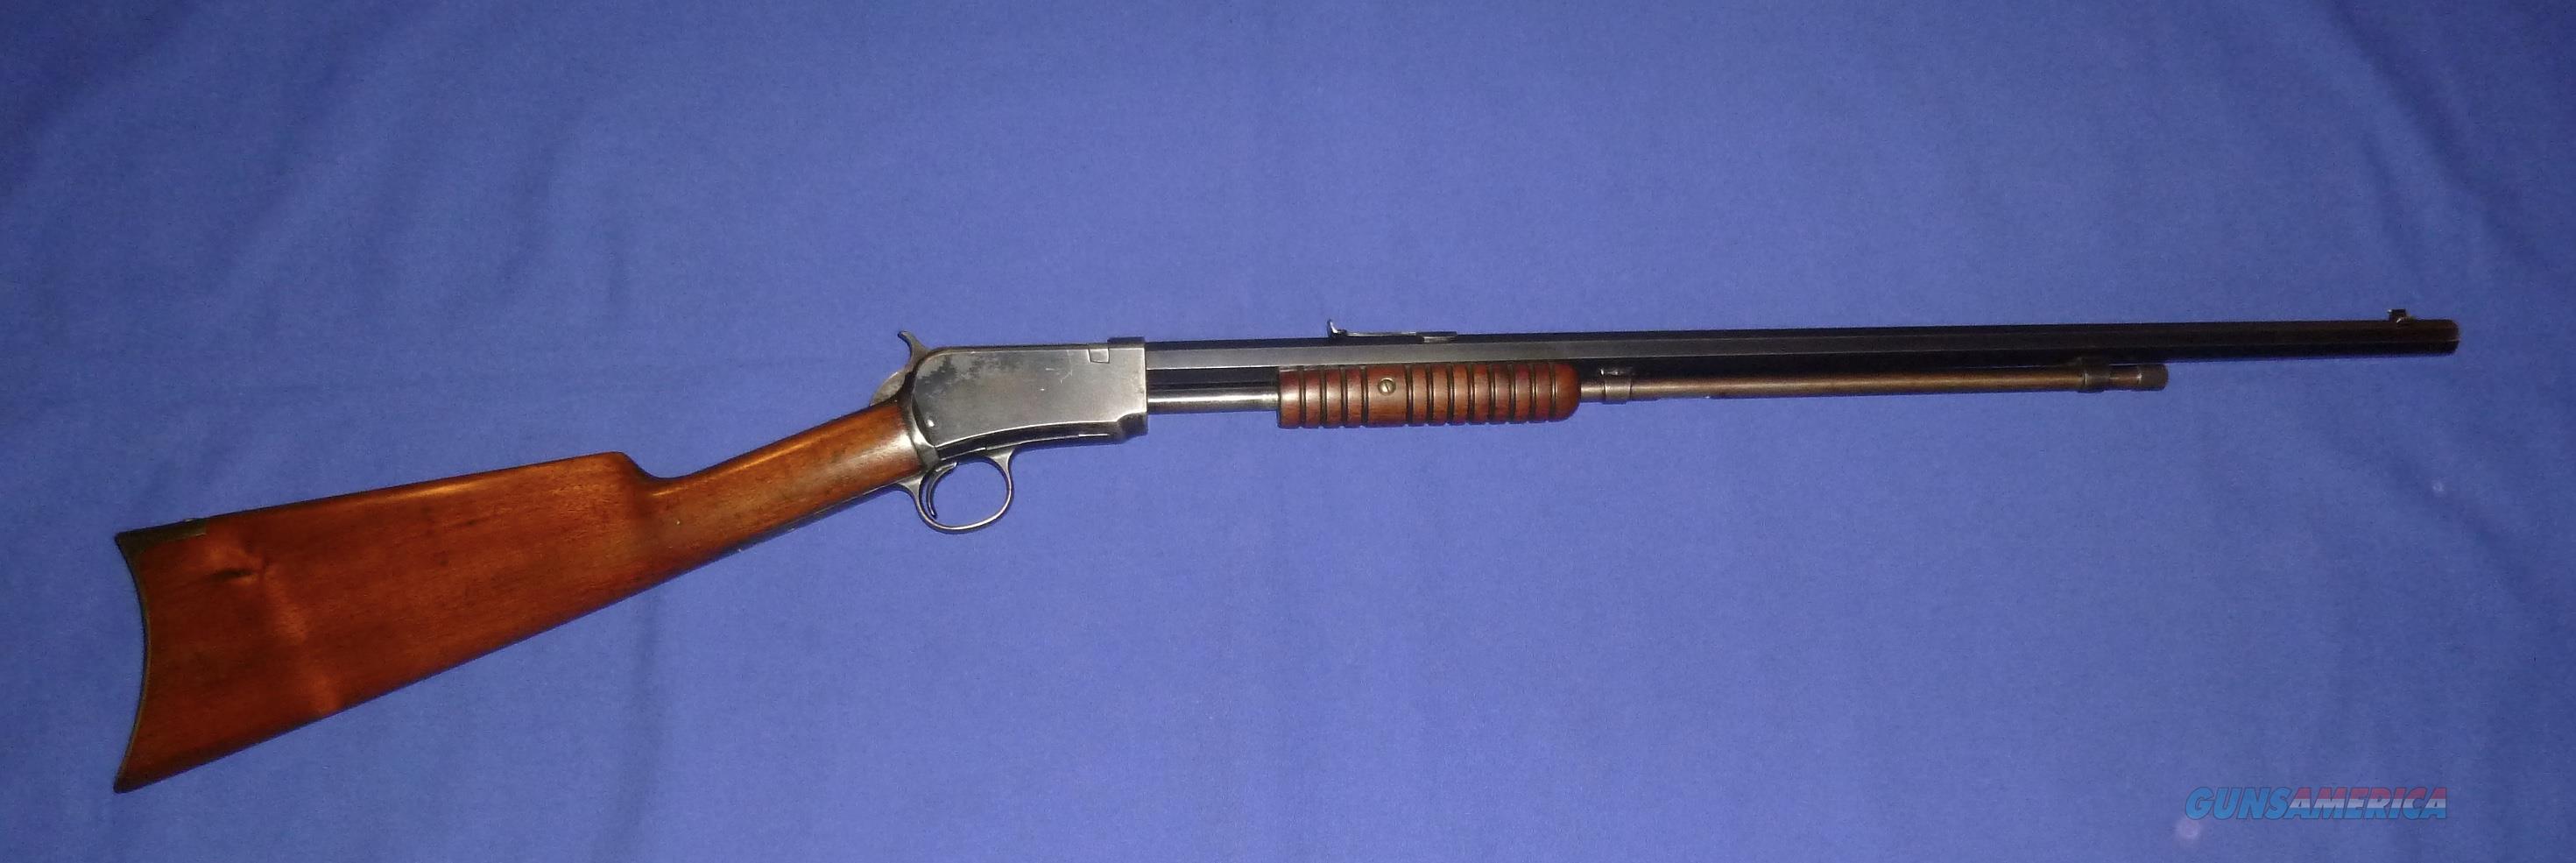 winchester model 1890 disassembly